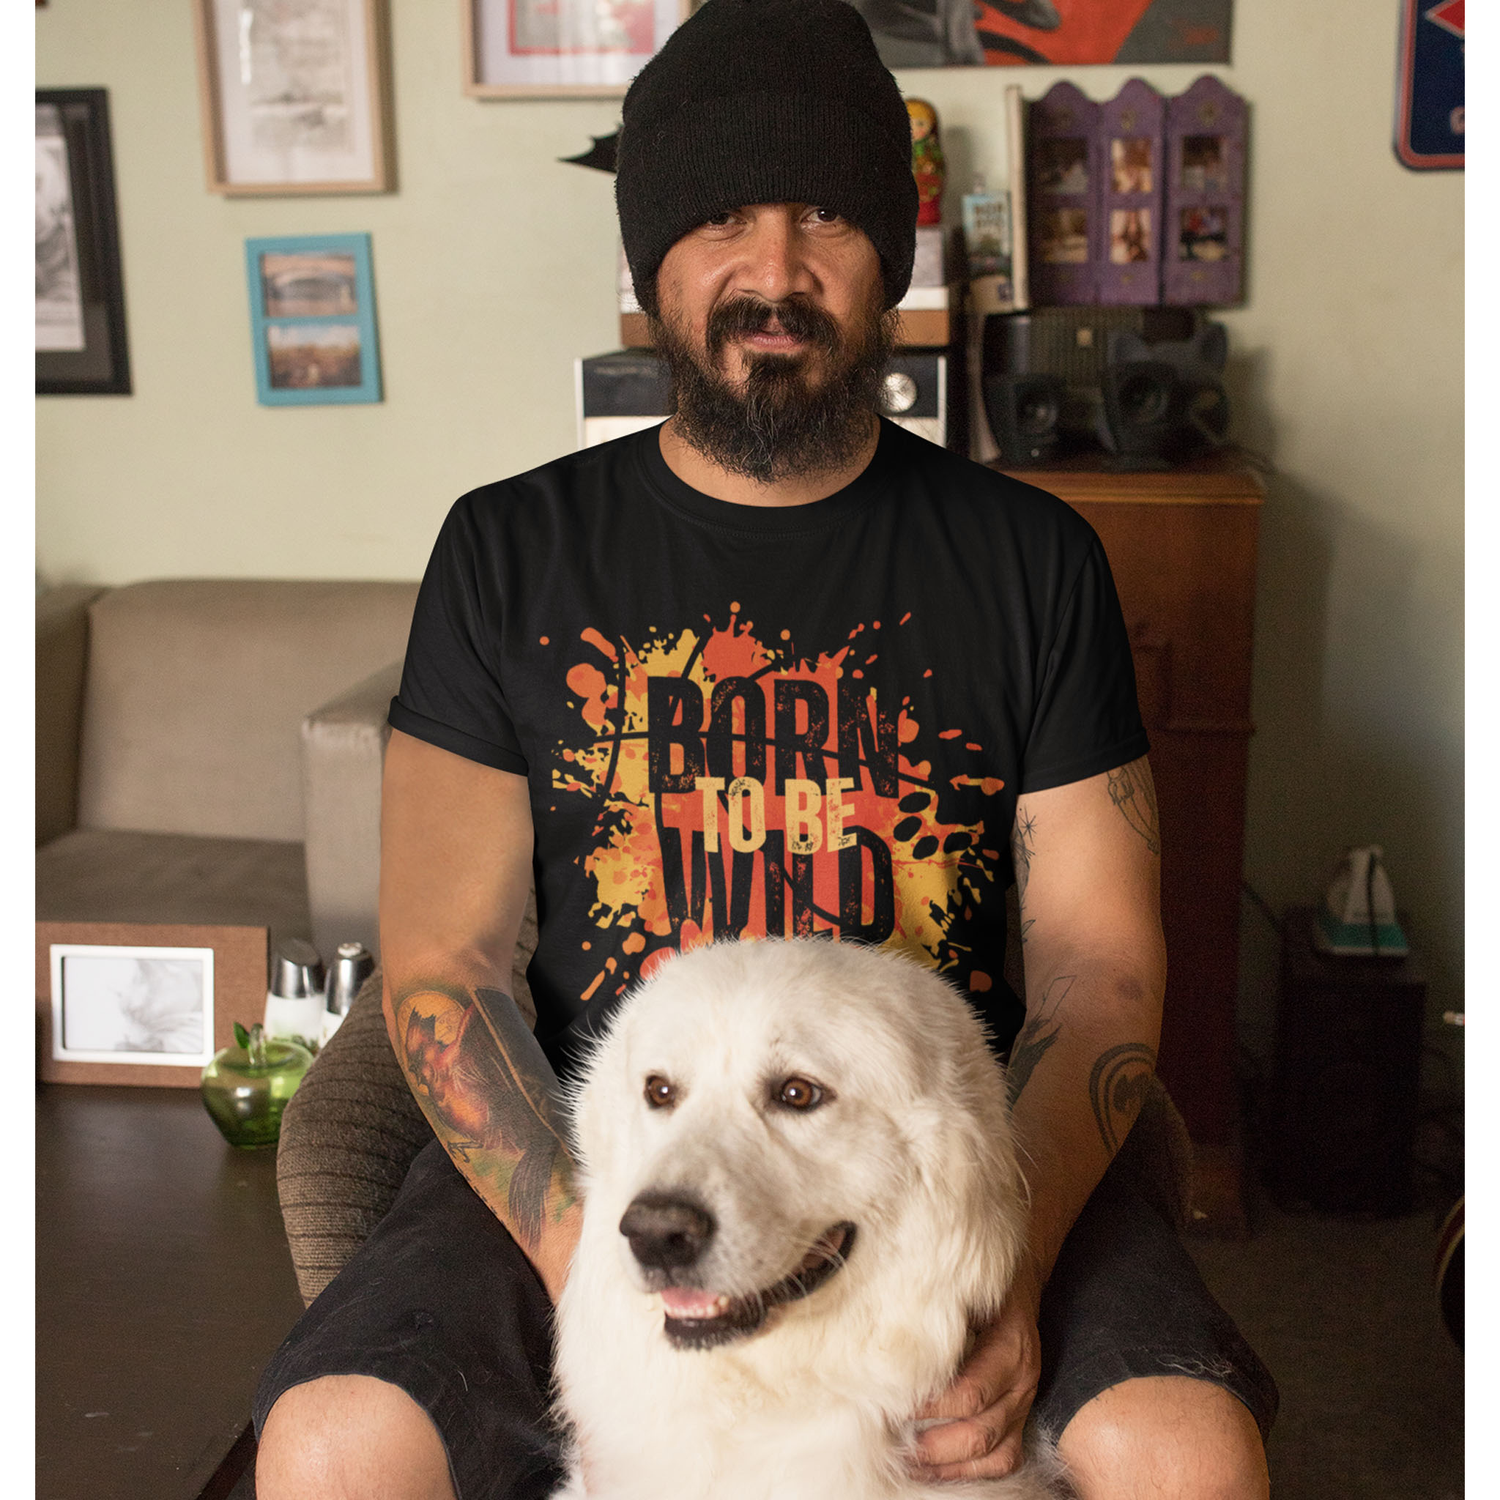 A steadfast man sits proudly sporting a "Dogs Pure Love" shirt adorned with the 'Born to be Wild' design, his loyal dog seated faithfully in front of him